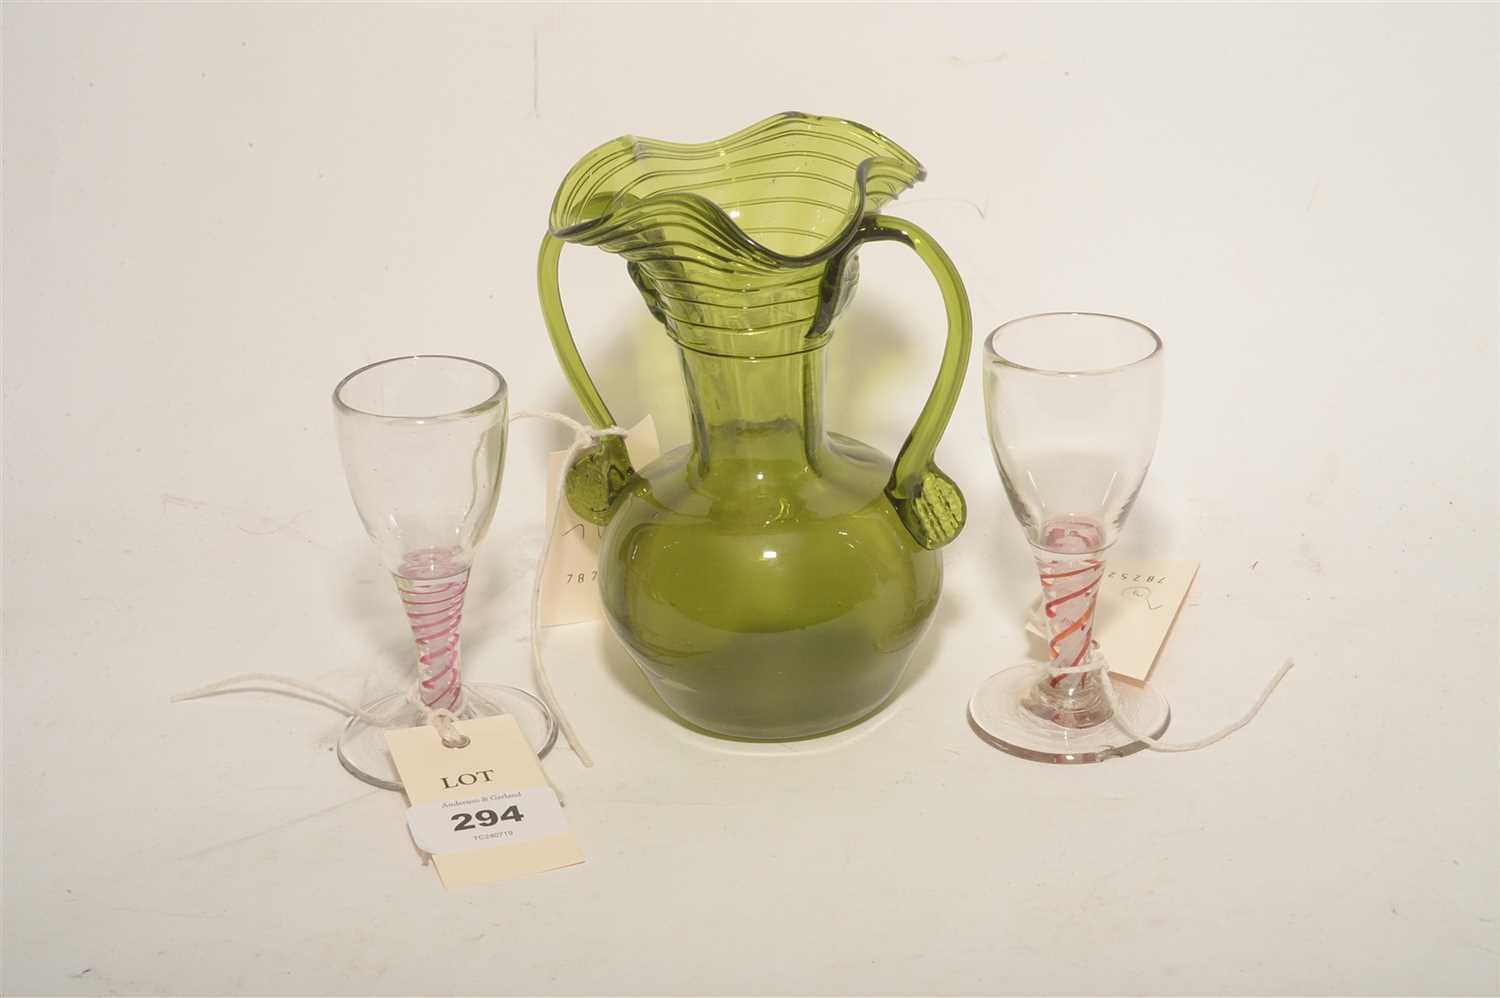 Lot 294 - Two glasses and a vase